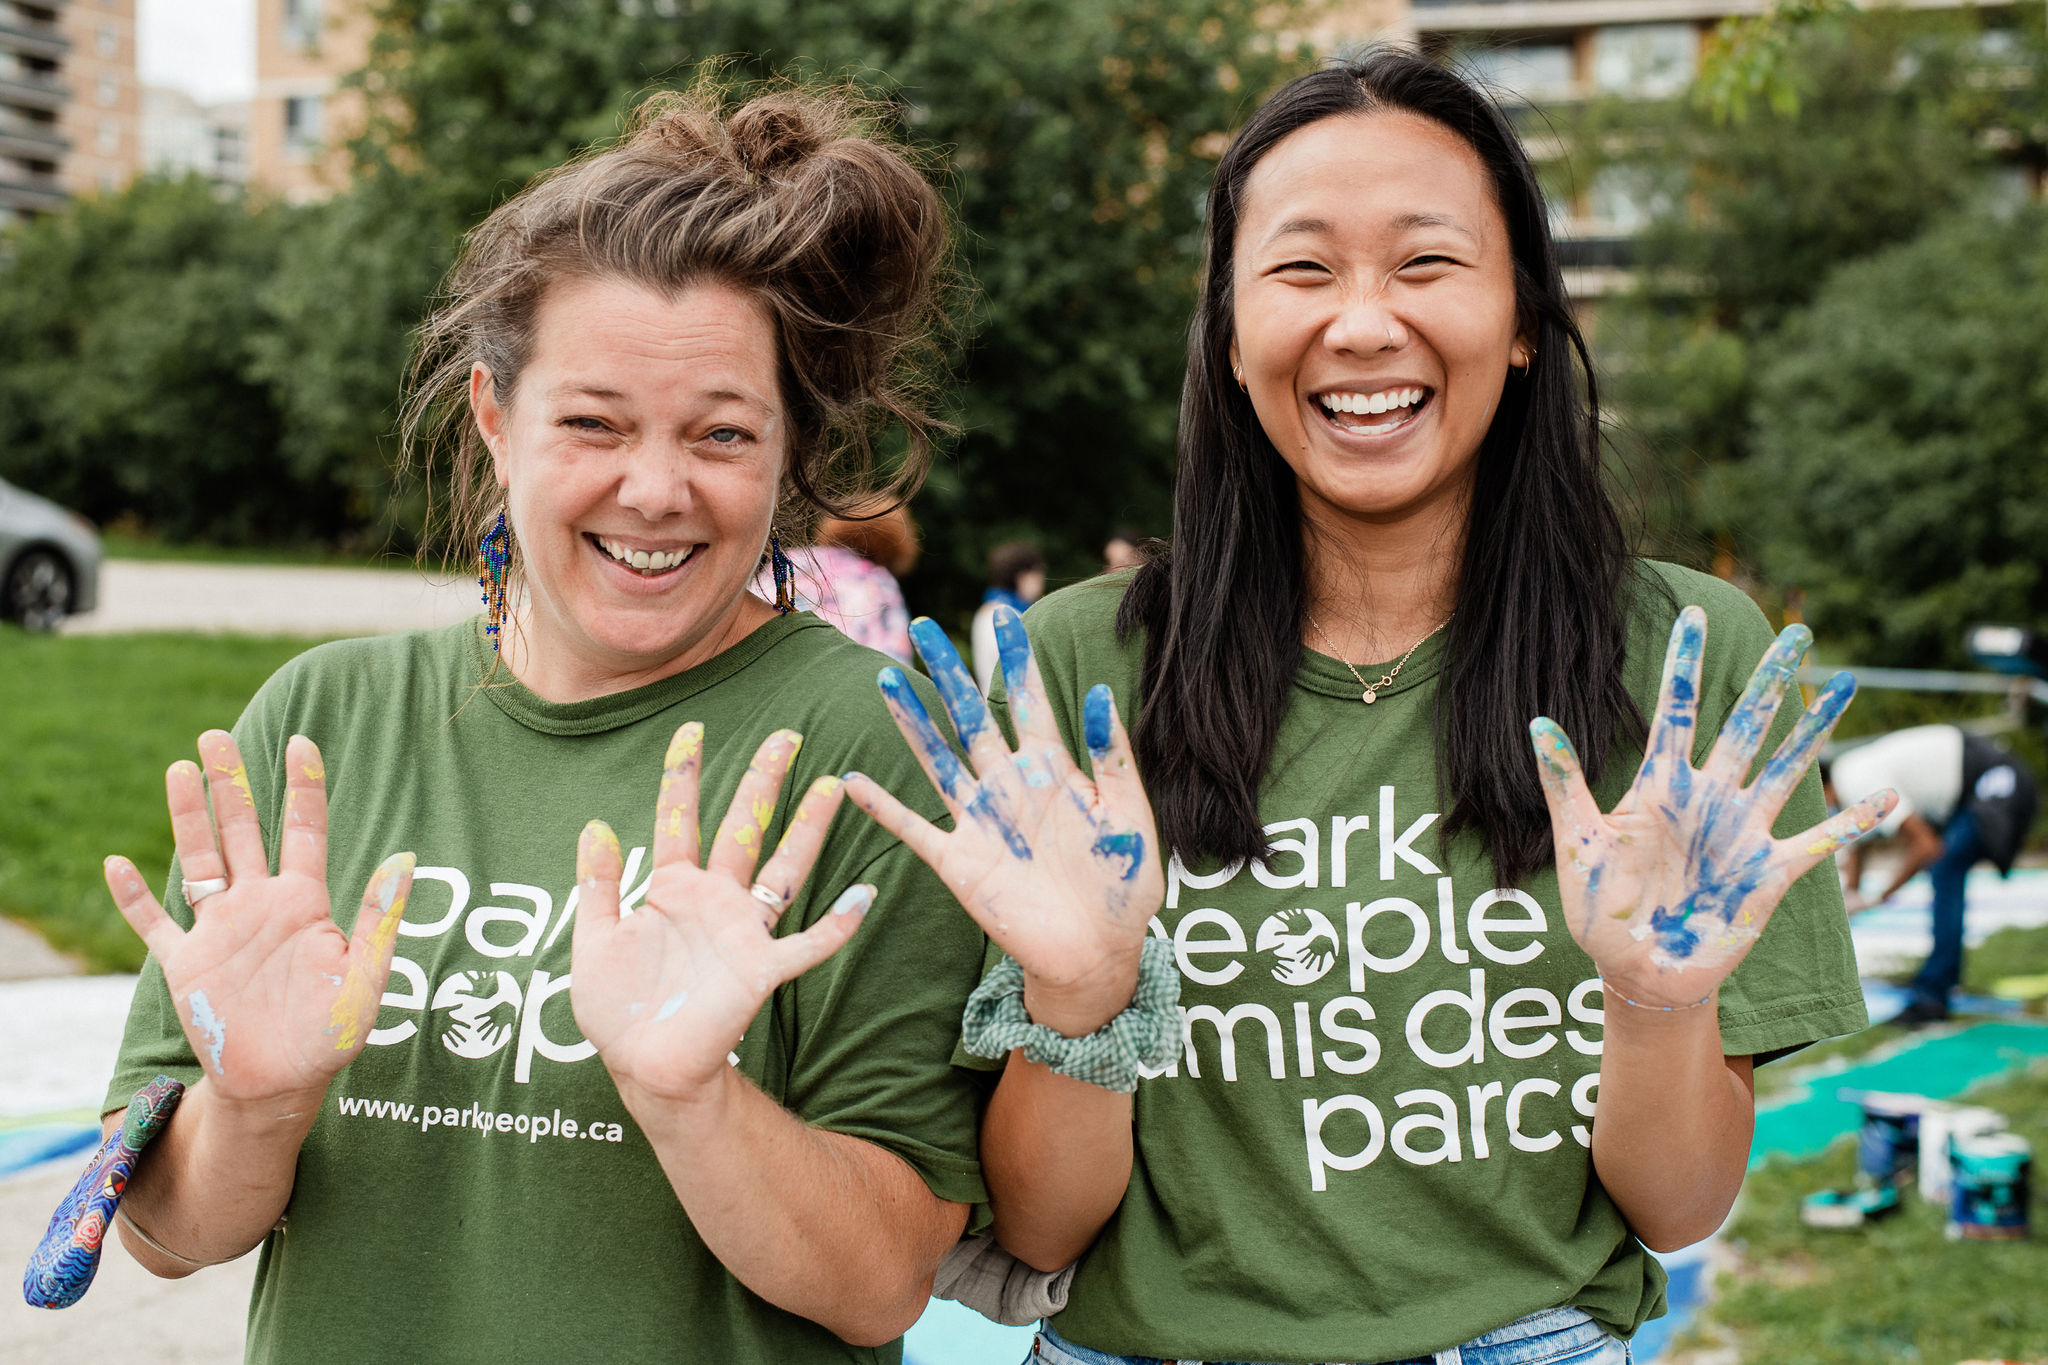 Two women wearing green shirts that say "Park People" hold up their hands and look directly at the camera while smiling.